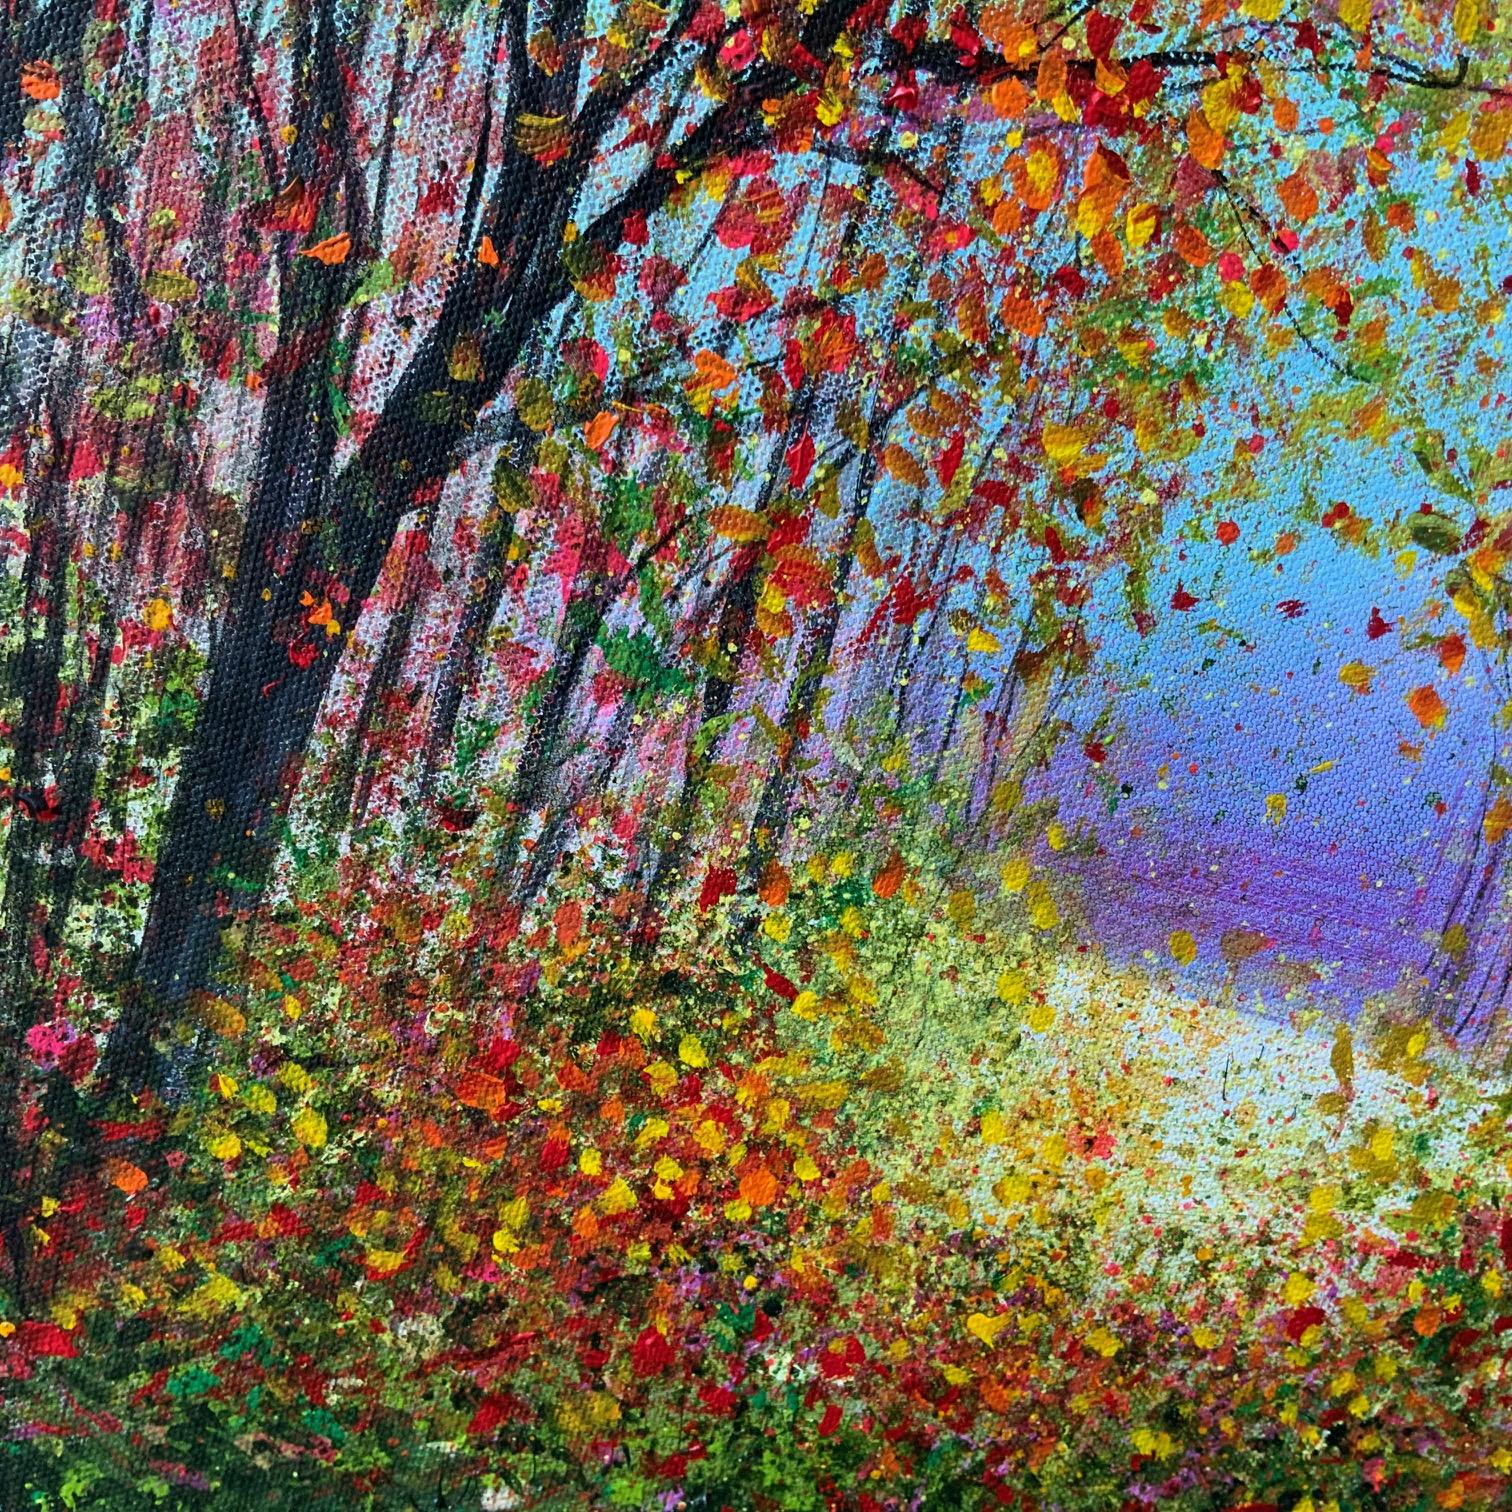 Rustic Woodland, Impressionist style art, Landscape painting, English Art - Realist Painting by Unknown